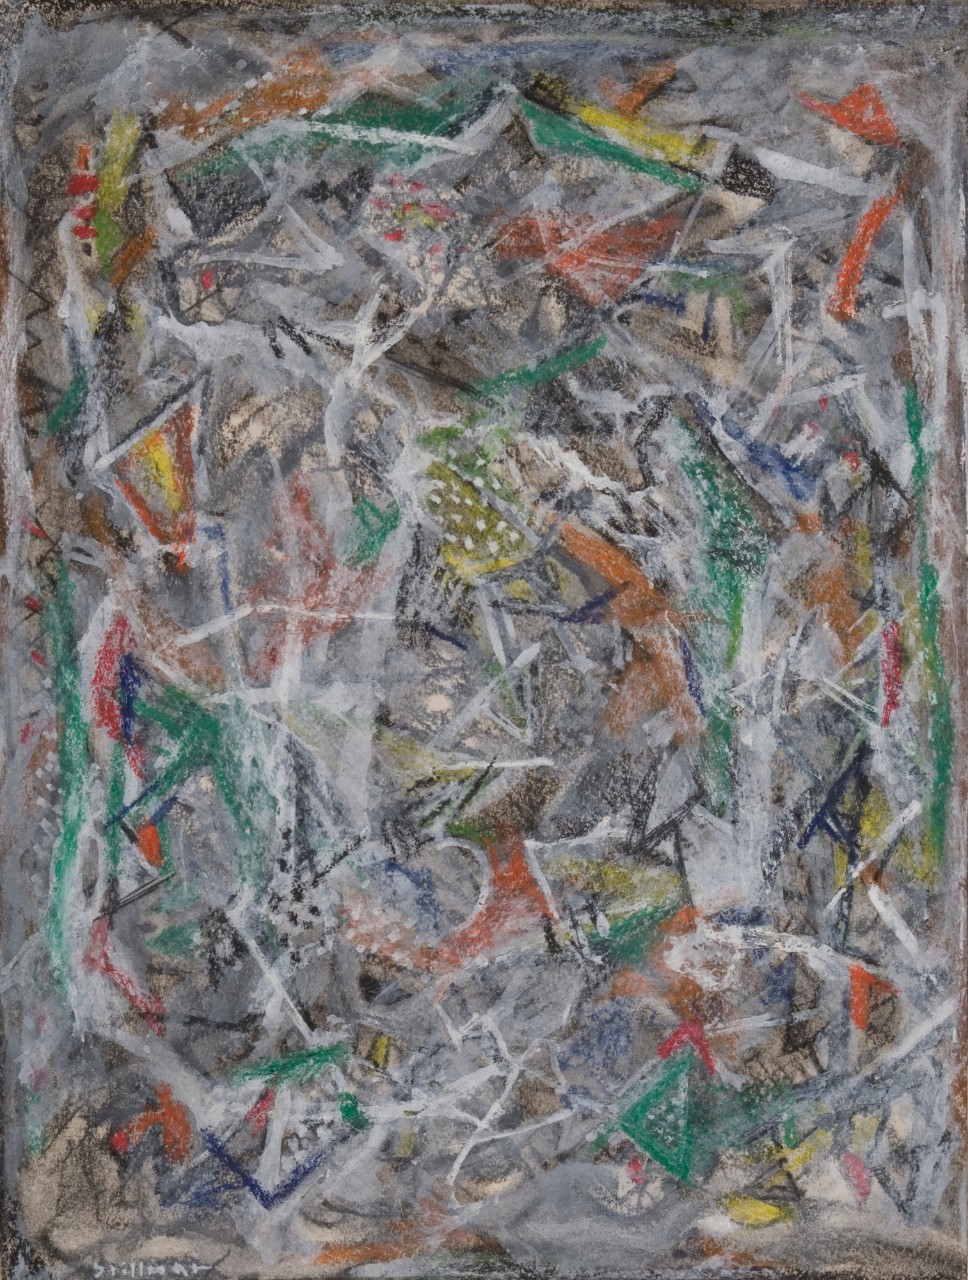 New York No. 9, c. 1946-48, gouache and ink on paper, 16 x 13 in. (40.6 x 33.0 cm), [SLF-322]